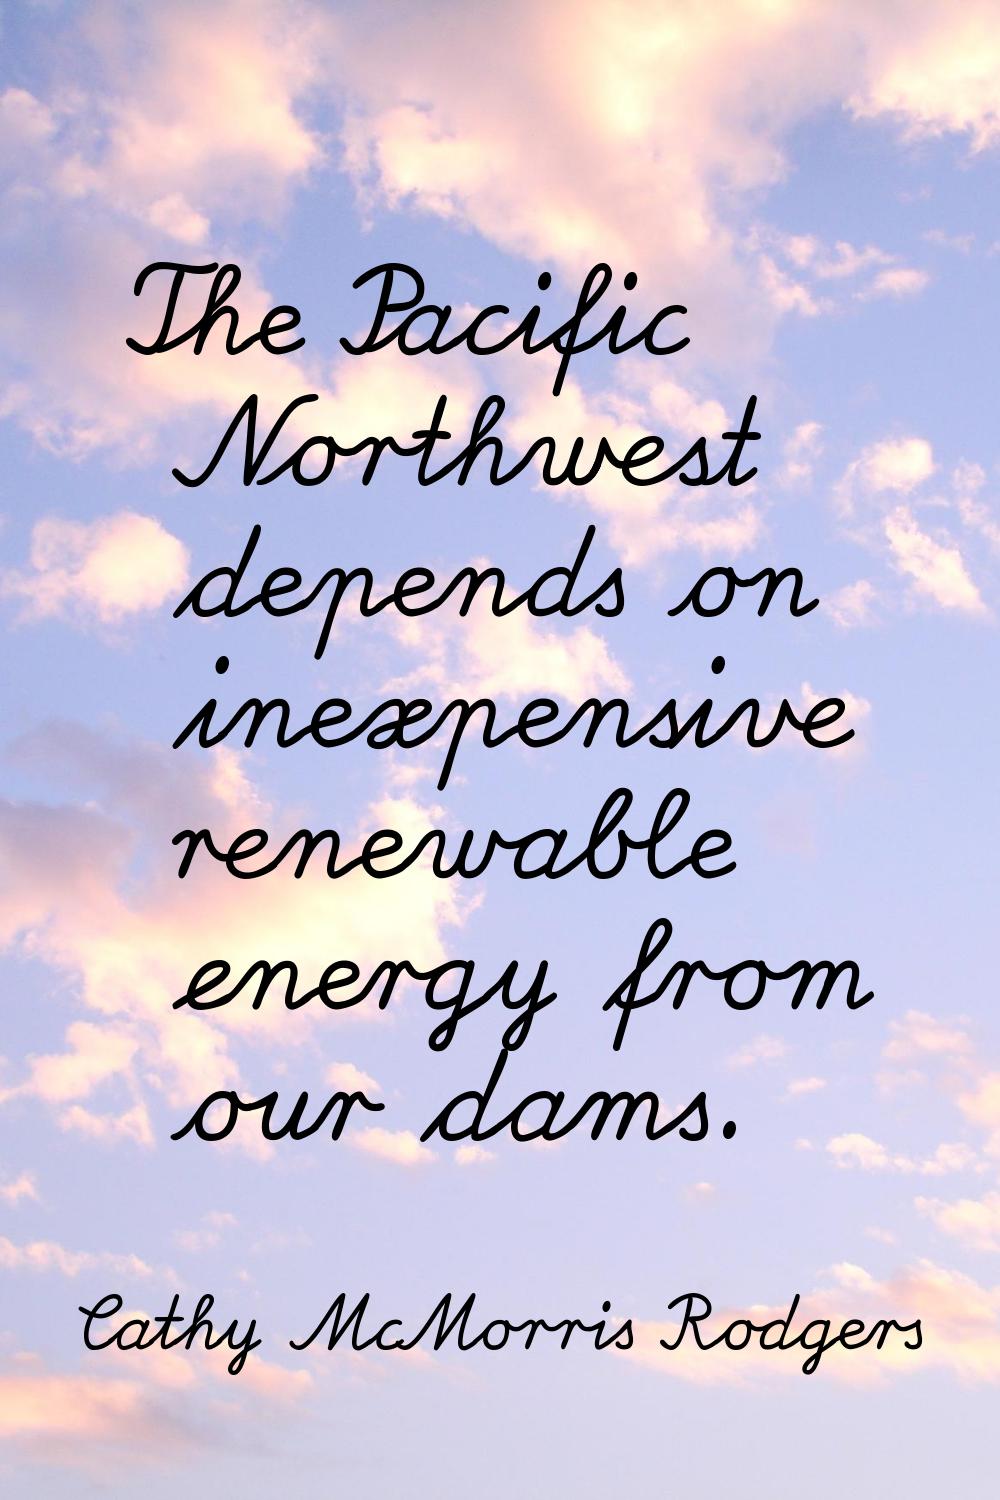 The Pacific Northwest depends on inexpensive renewable energy from our dams.